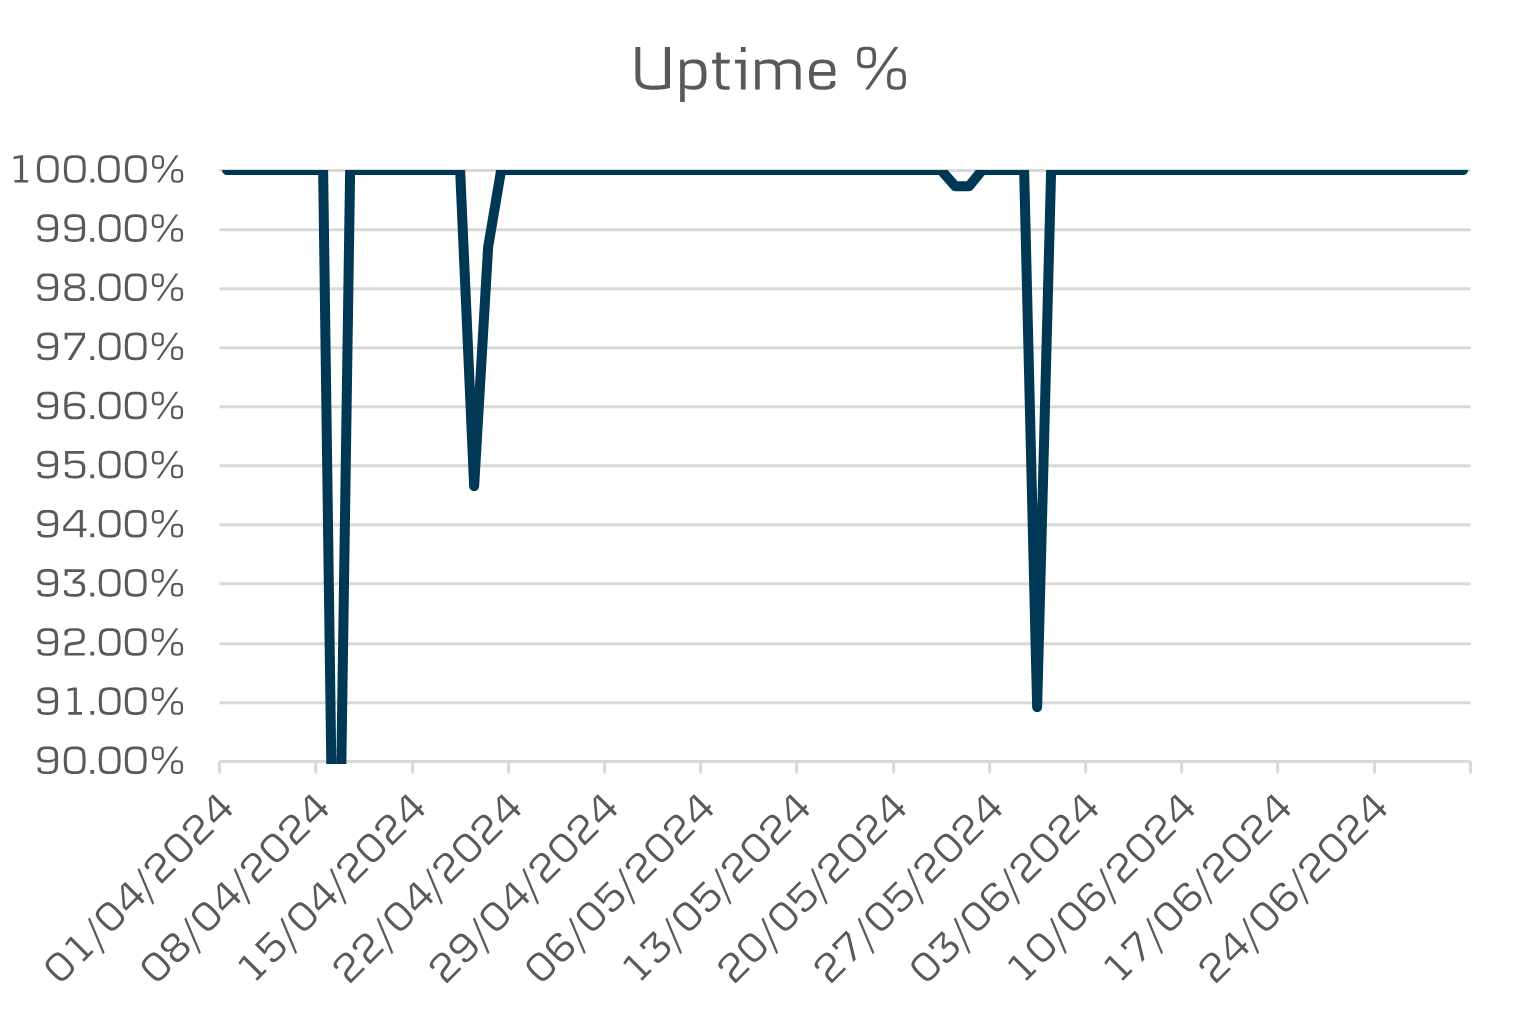 Open banking uptime